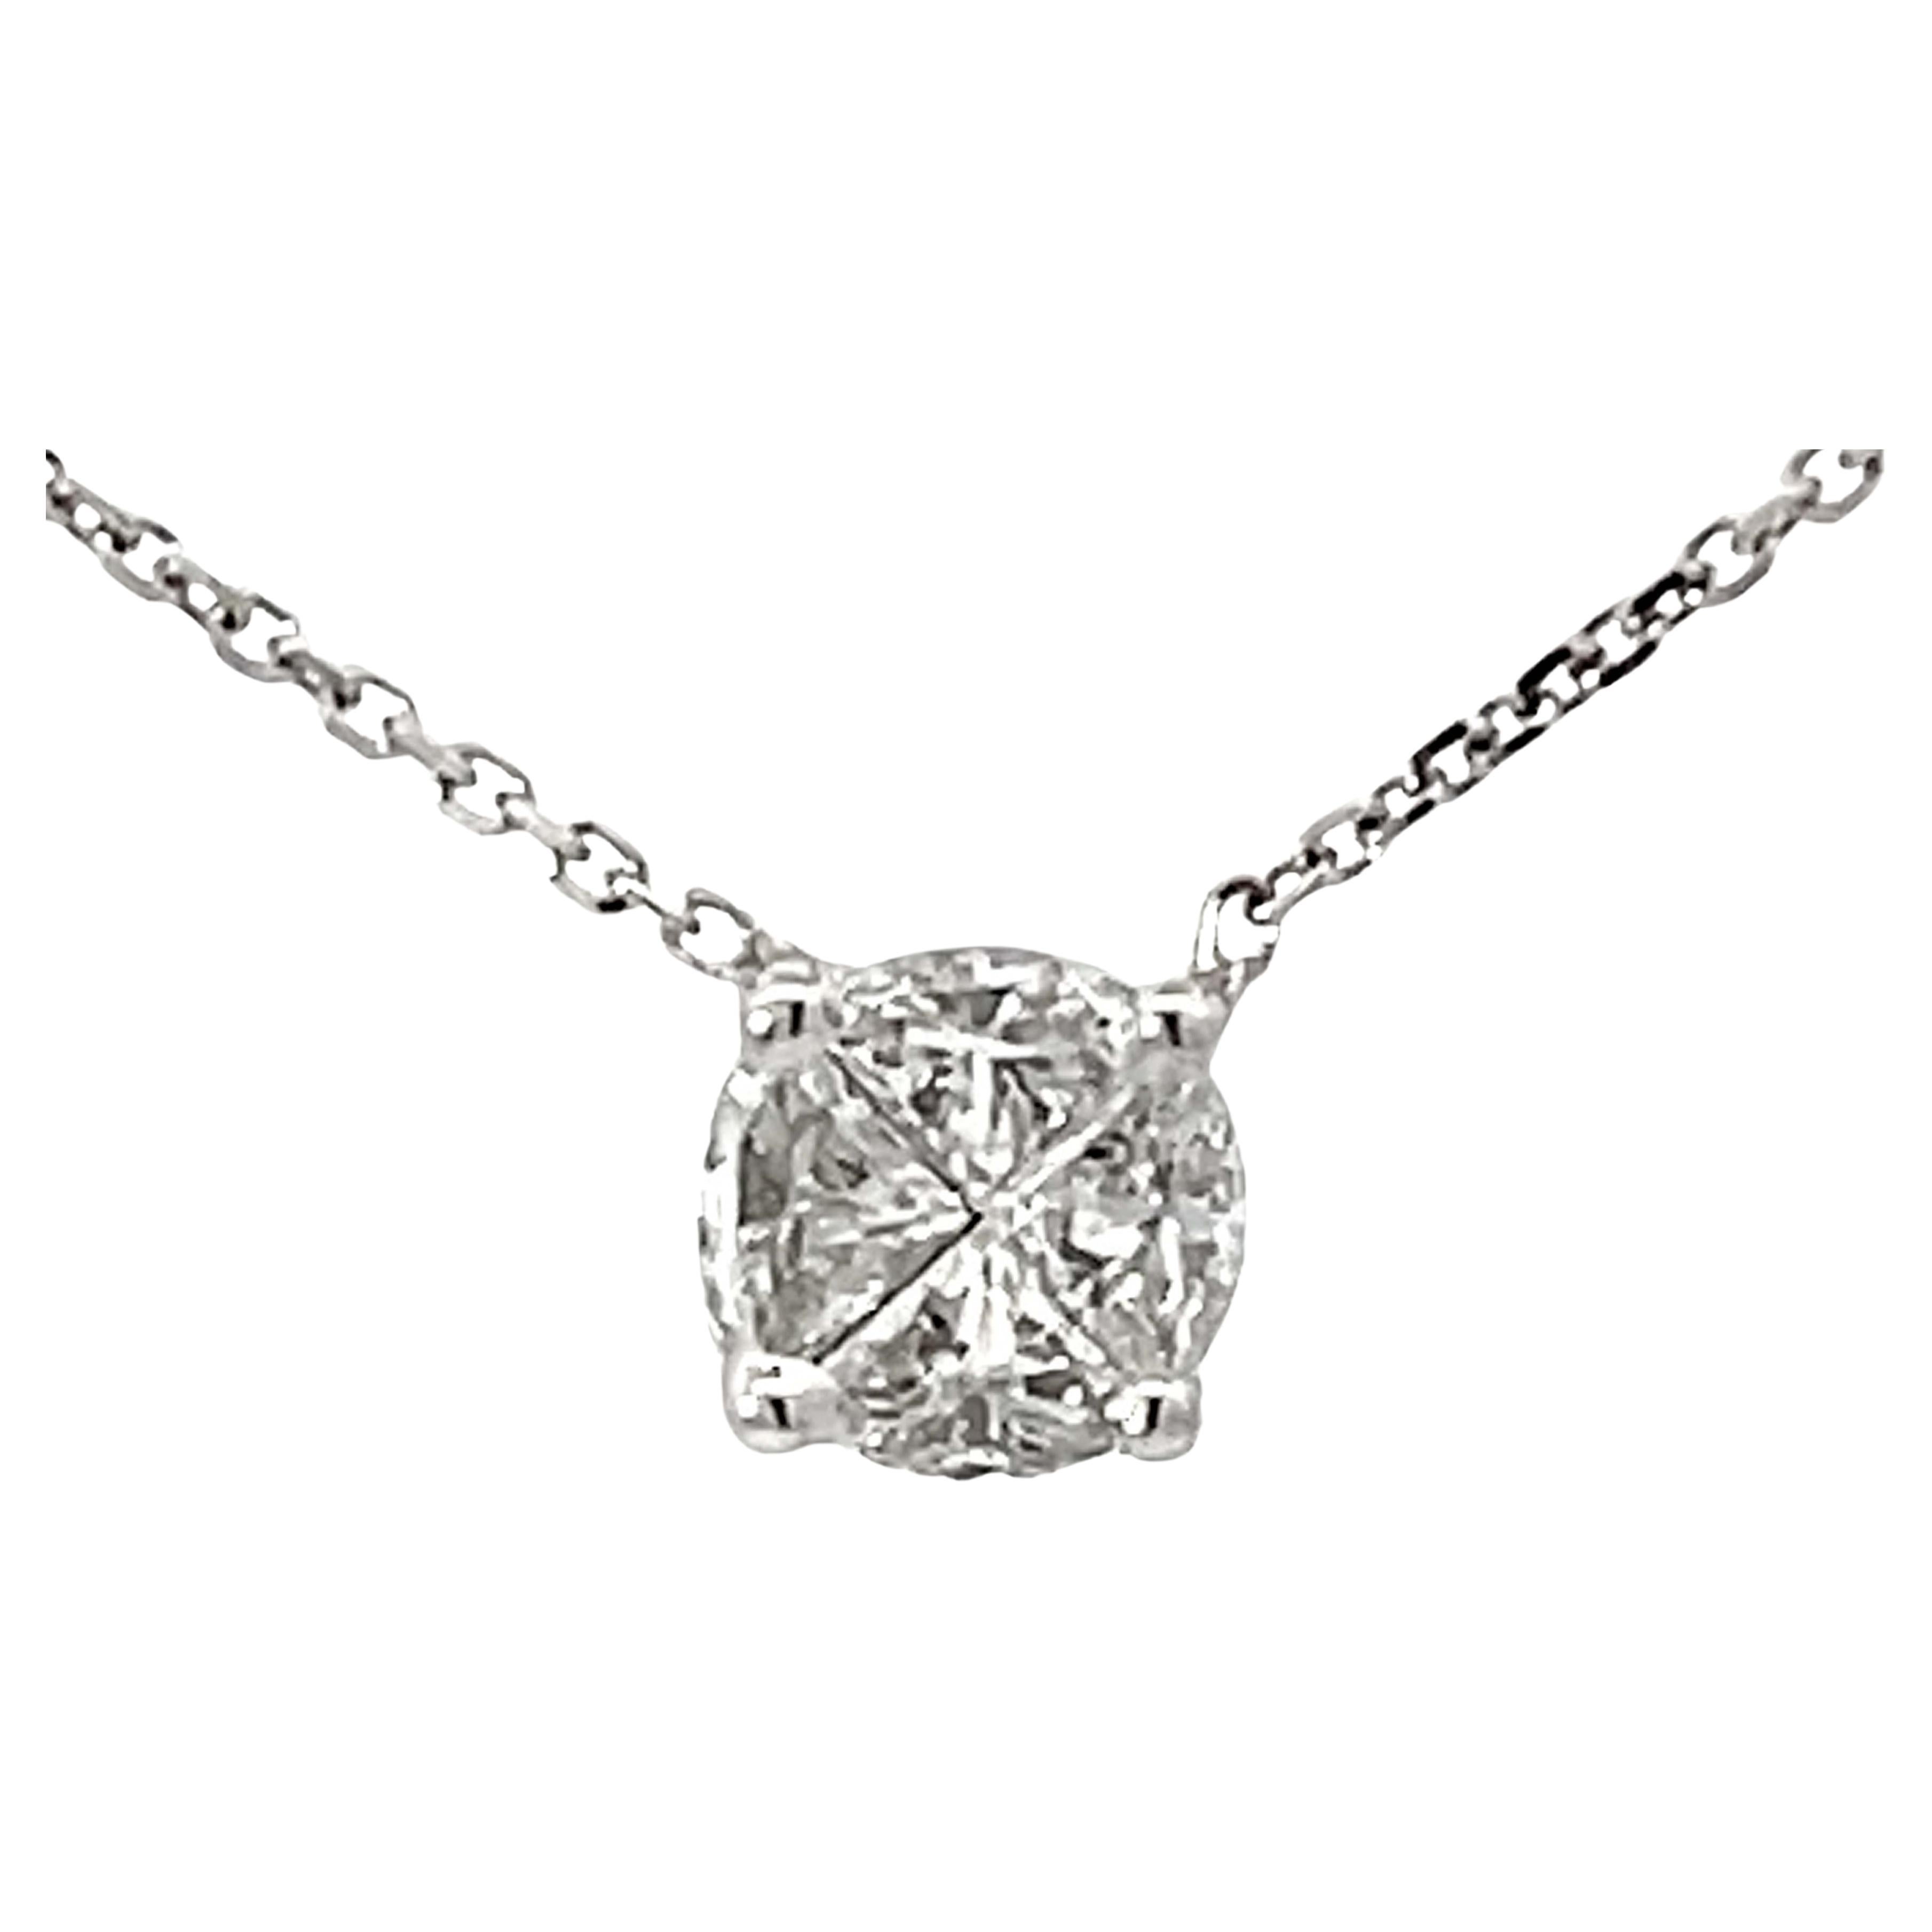 Piecut Diamond Necklace Solid 18k White Gold For Sale